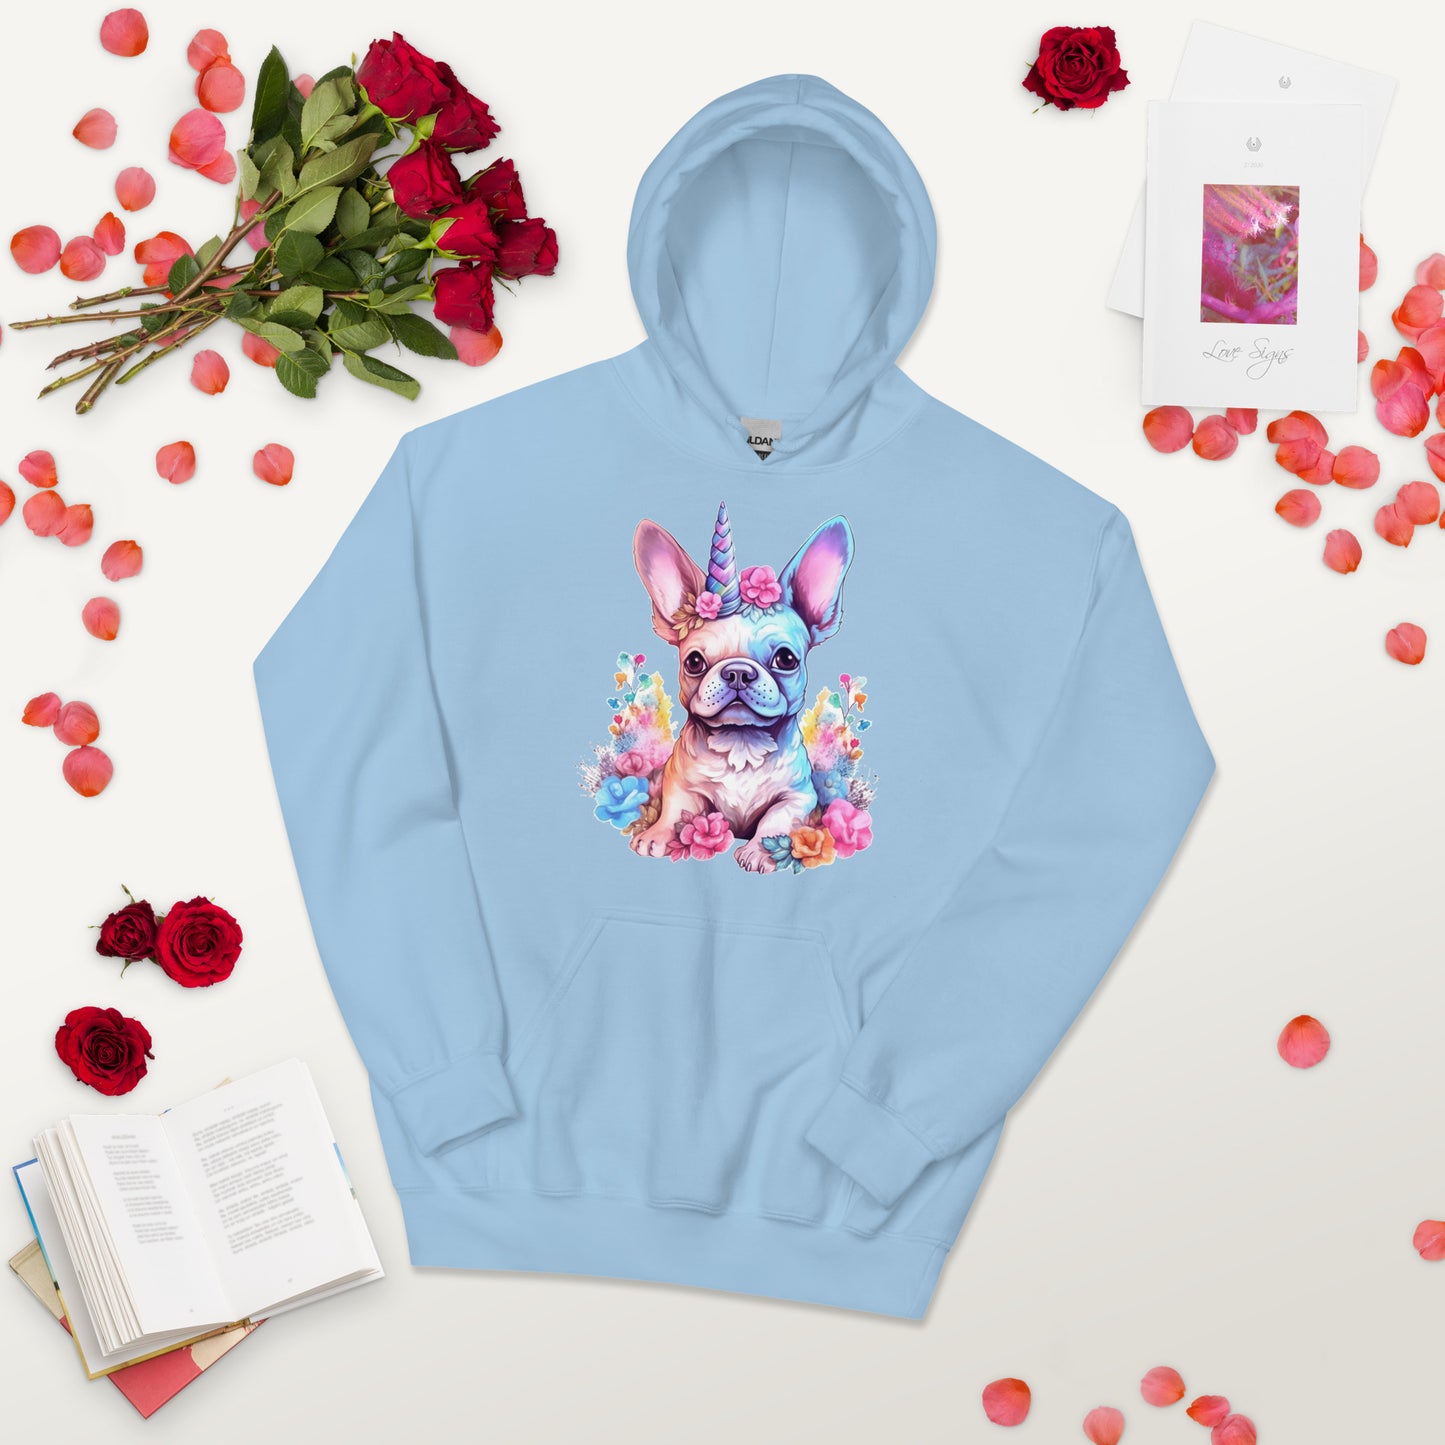 Unicorn-Inspired Frenchie Unisex Heavy Blend Hoodie - A Magical Choice for Style-Conscious Pet Lovers